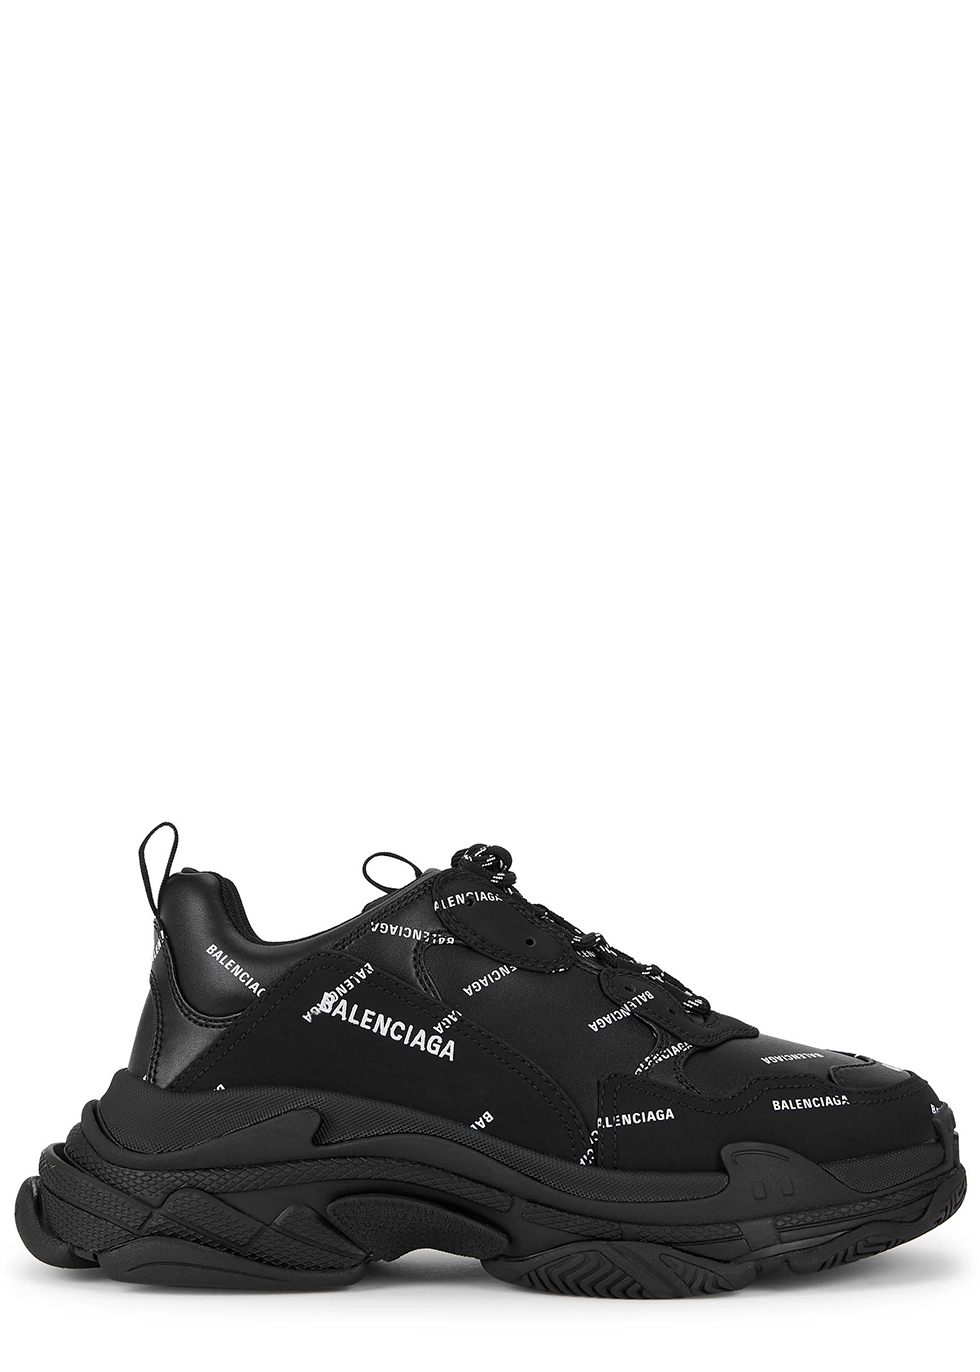 Black And White Balenciaga Sneakers Deals, 57% OFF | www 